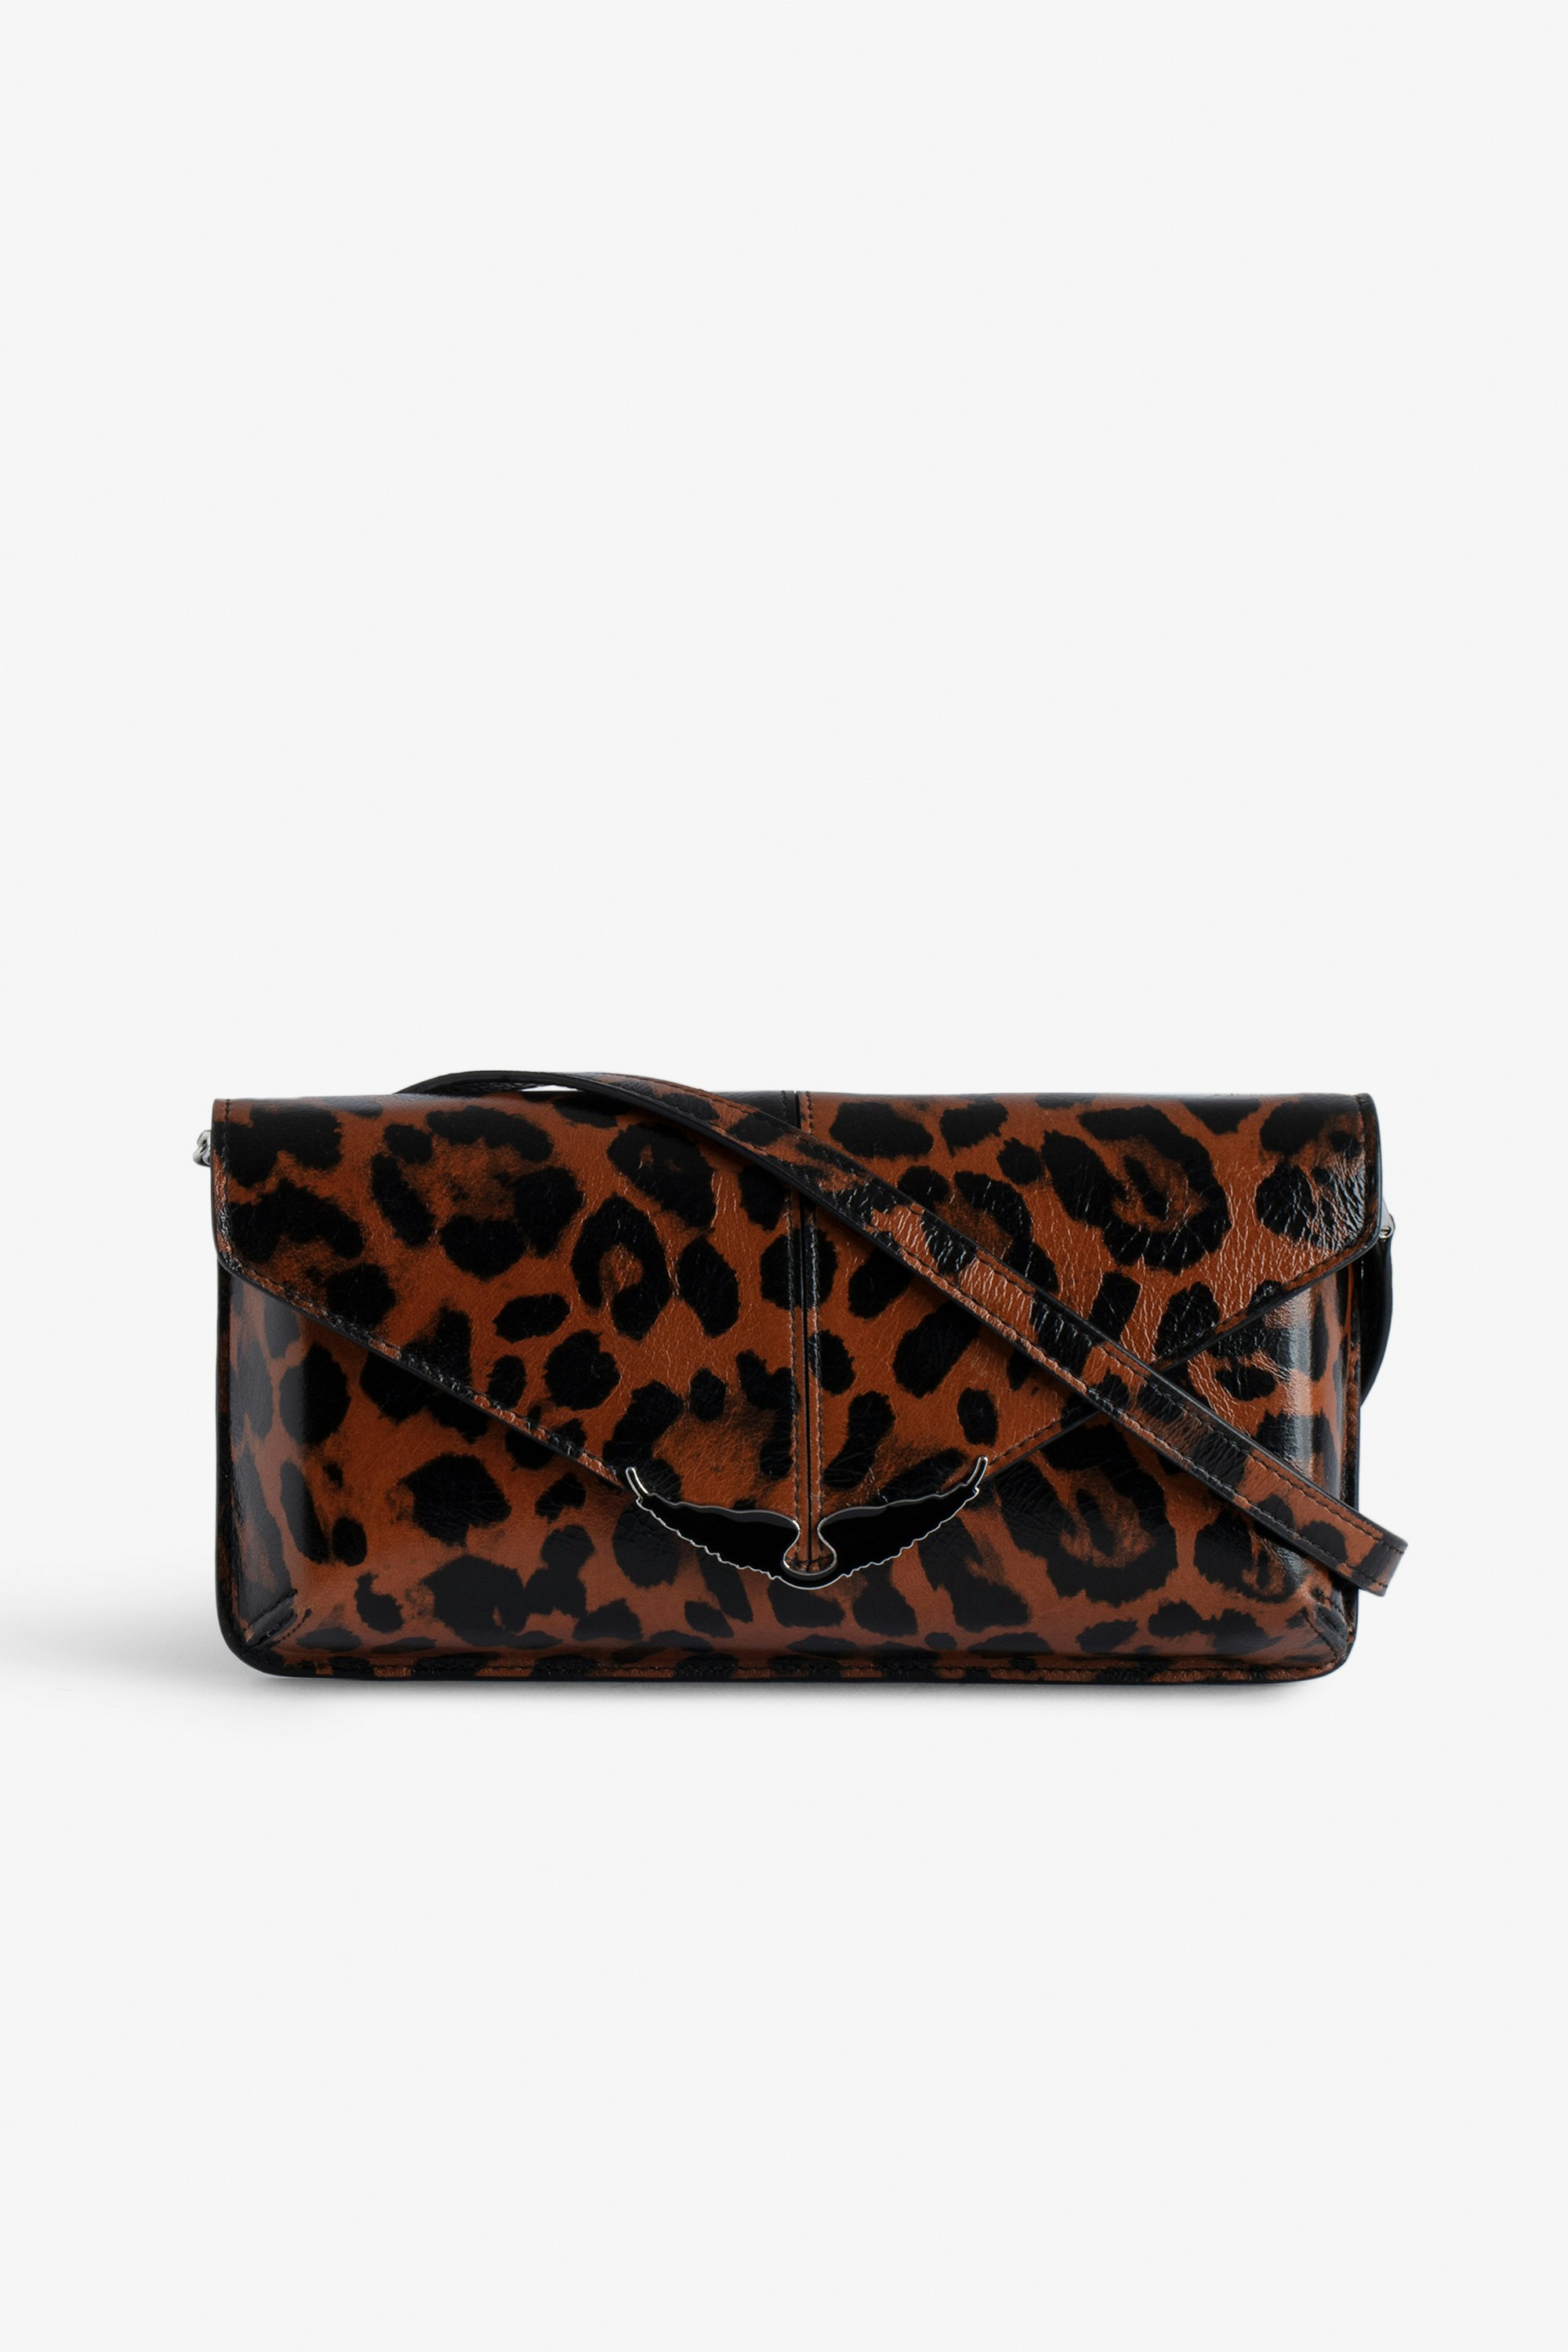 Borderline Leopard Clutch - Women’s brown patent leather leopard-print clutch with shoulder strap with wings charm.